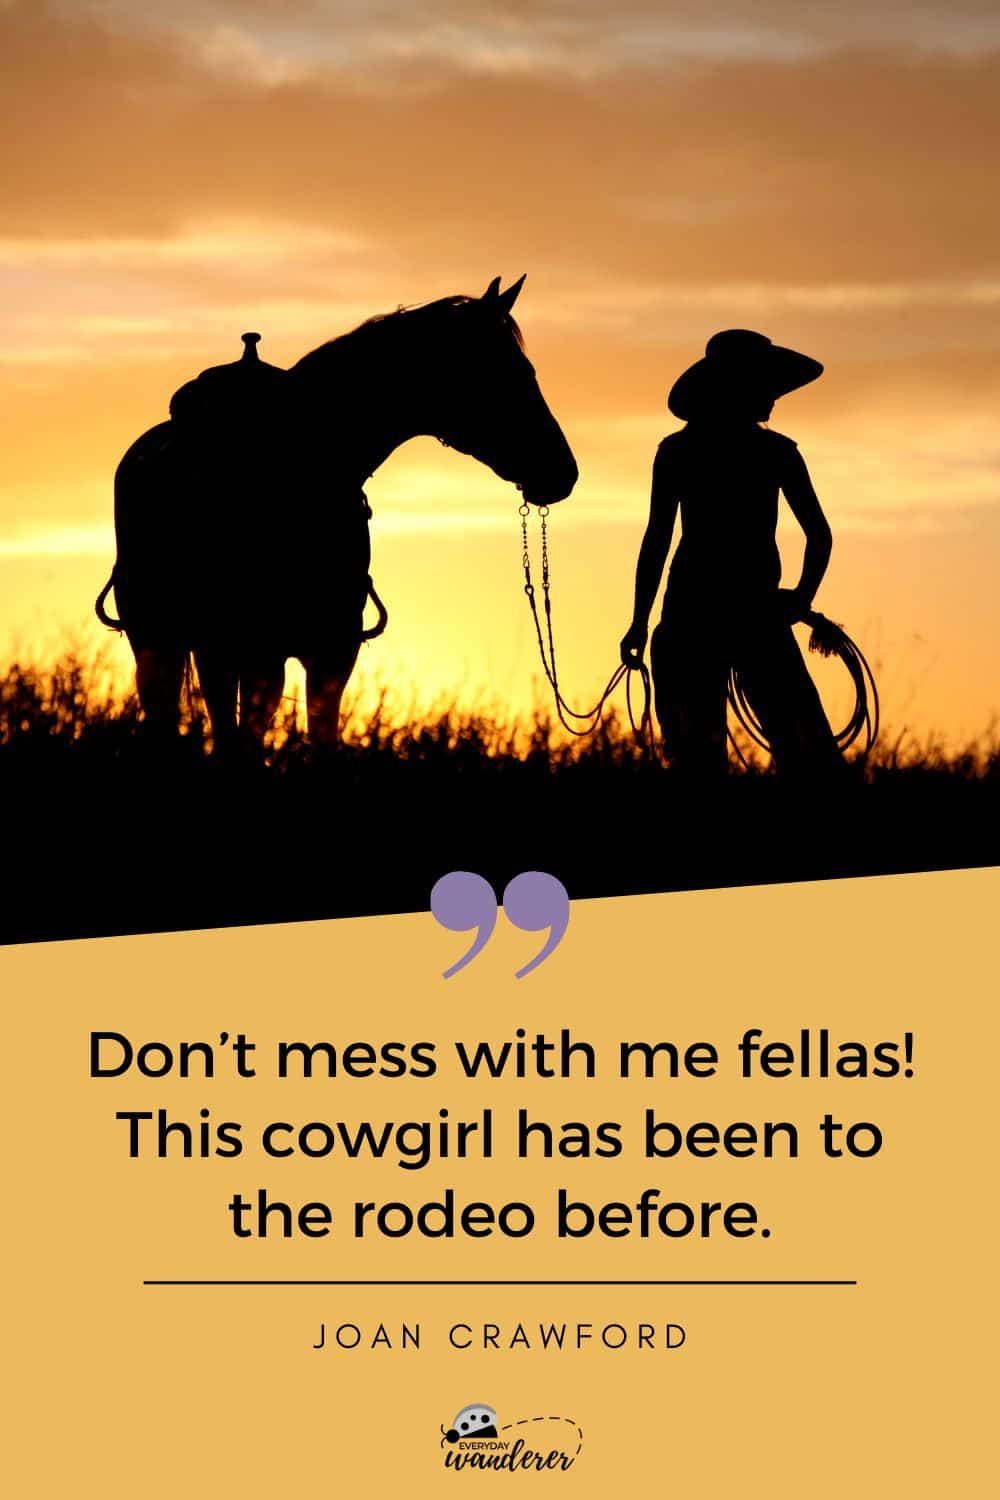 Saddle Up And Be Inspired By These Powerful Cowgirl Quotes